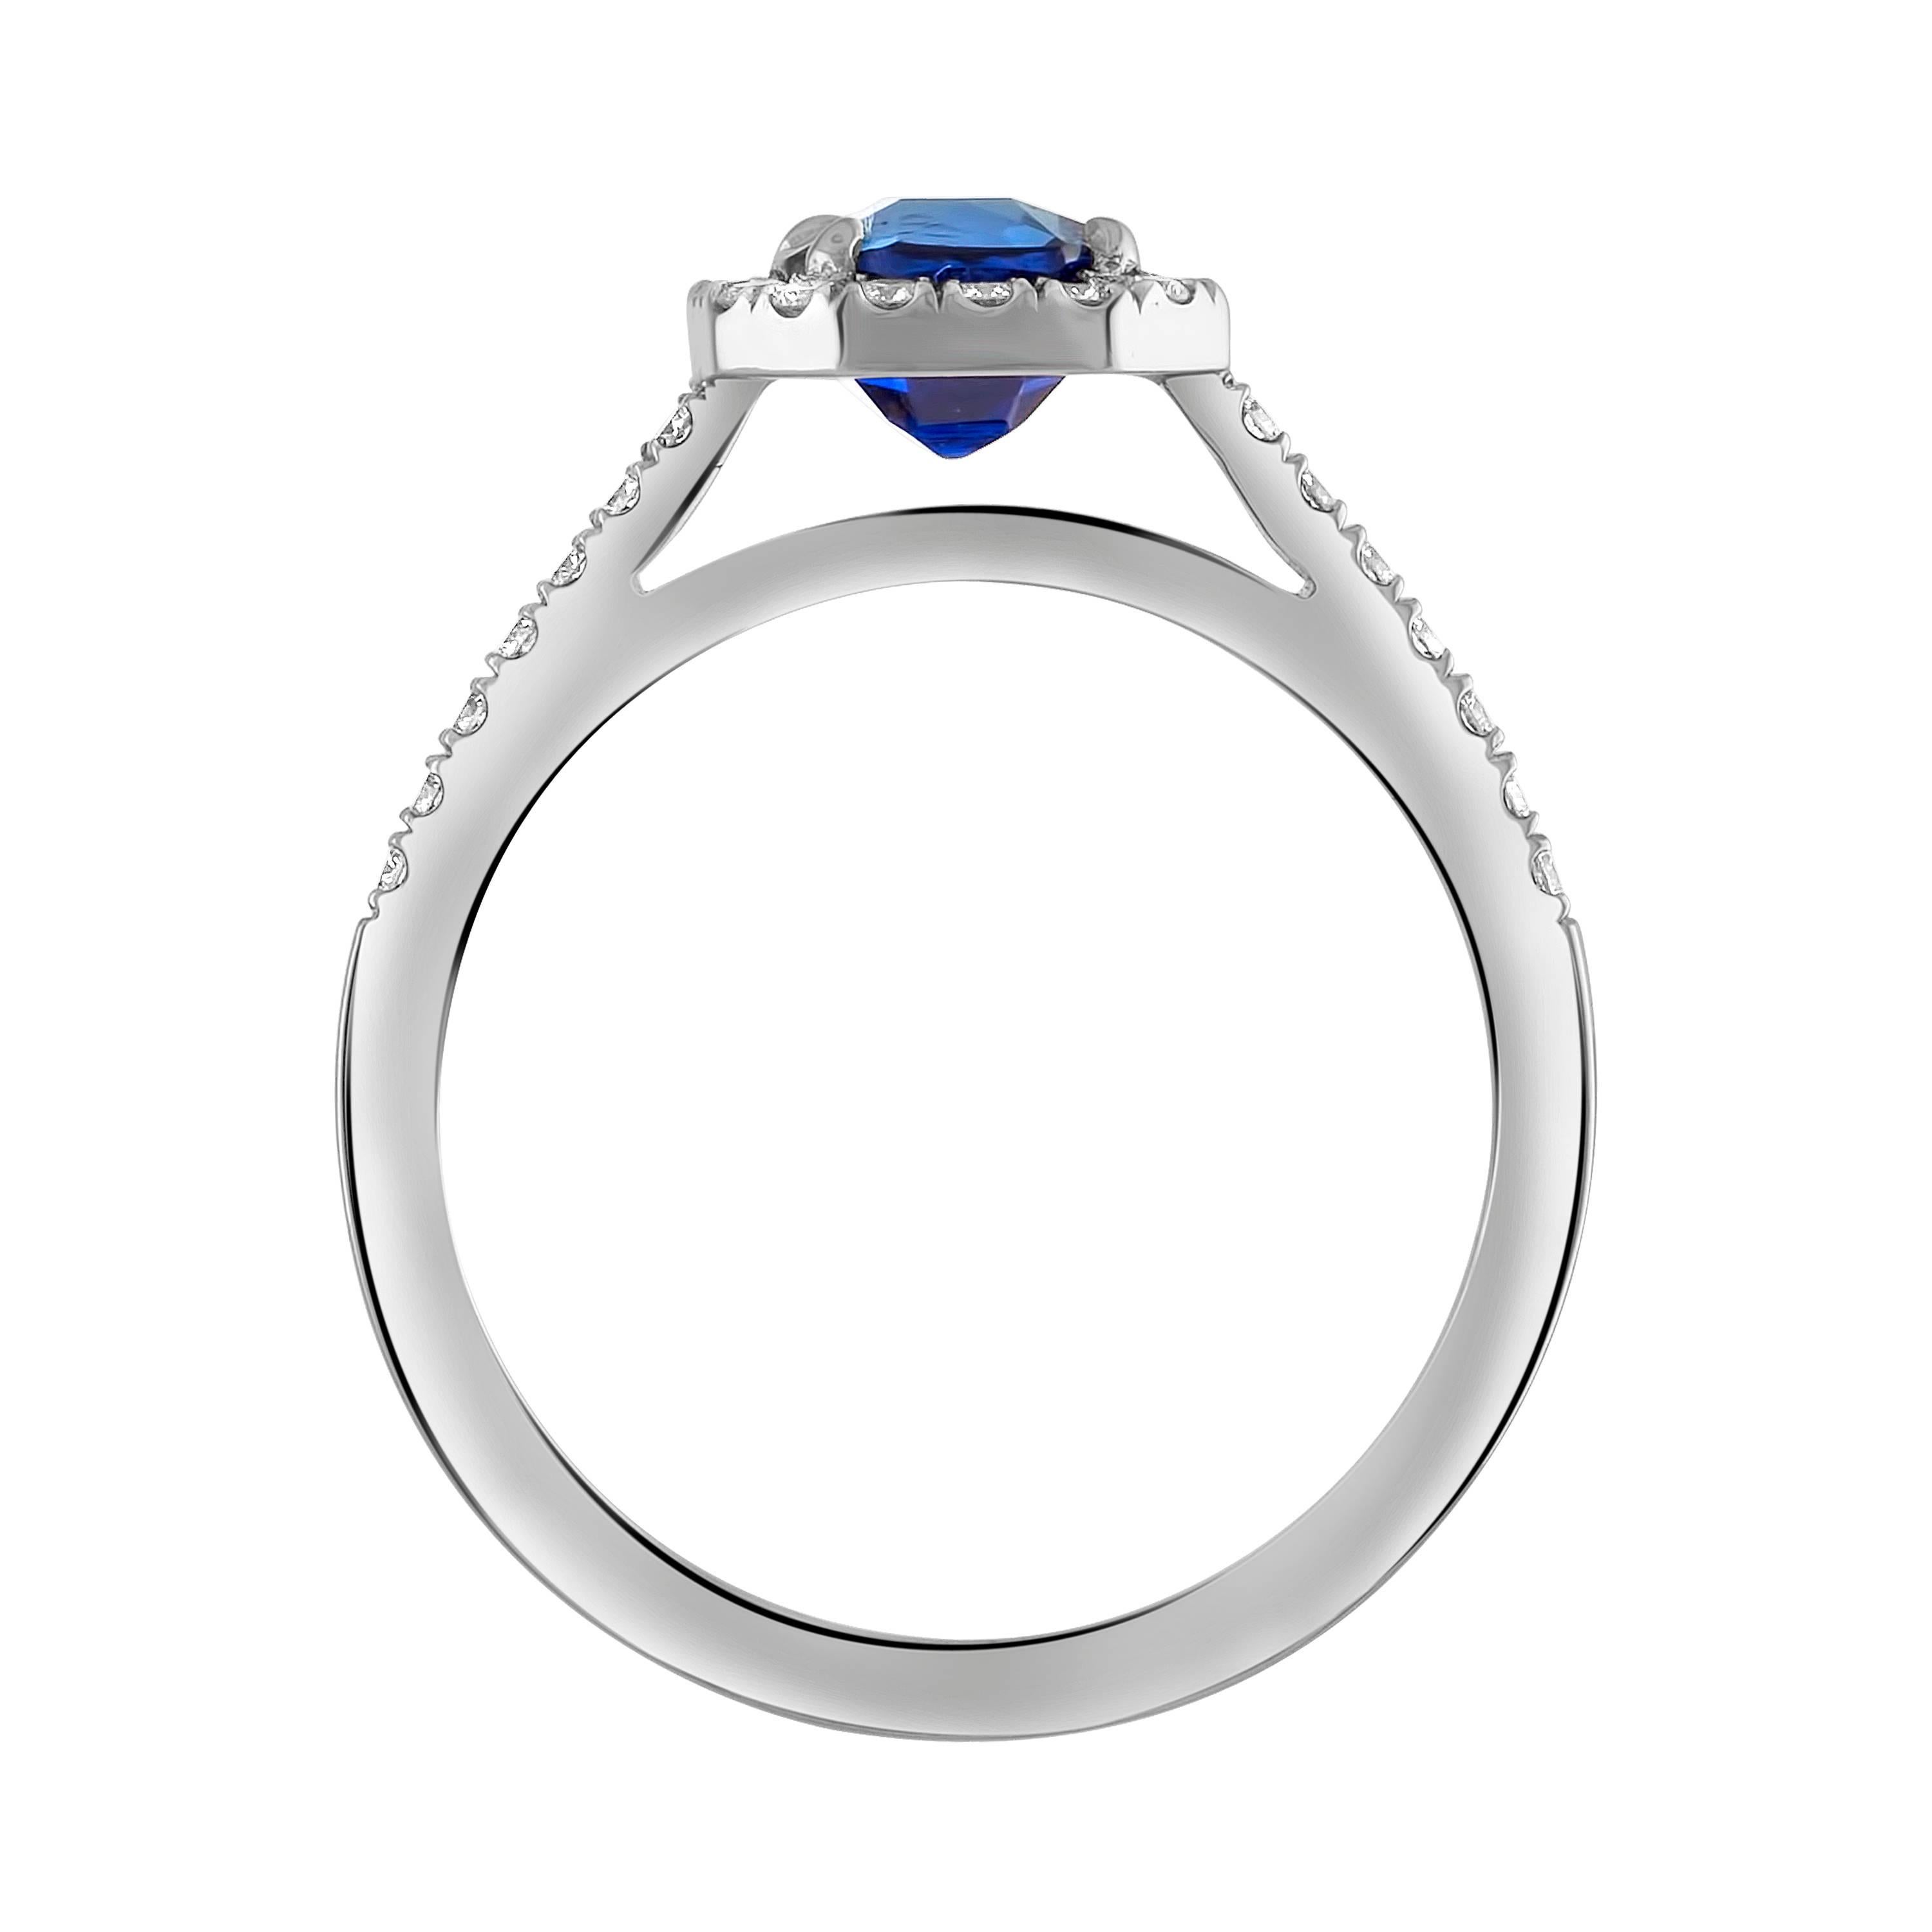 Handmade Platinum, Certified Kashmir Blue Sapphire and Diamond Surround Ring In New Condition For Sale In Washington, DC